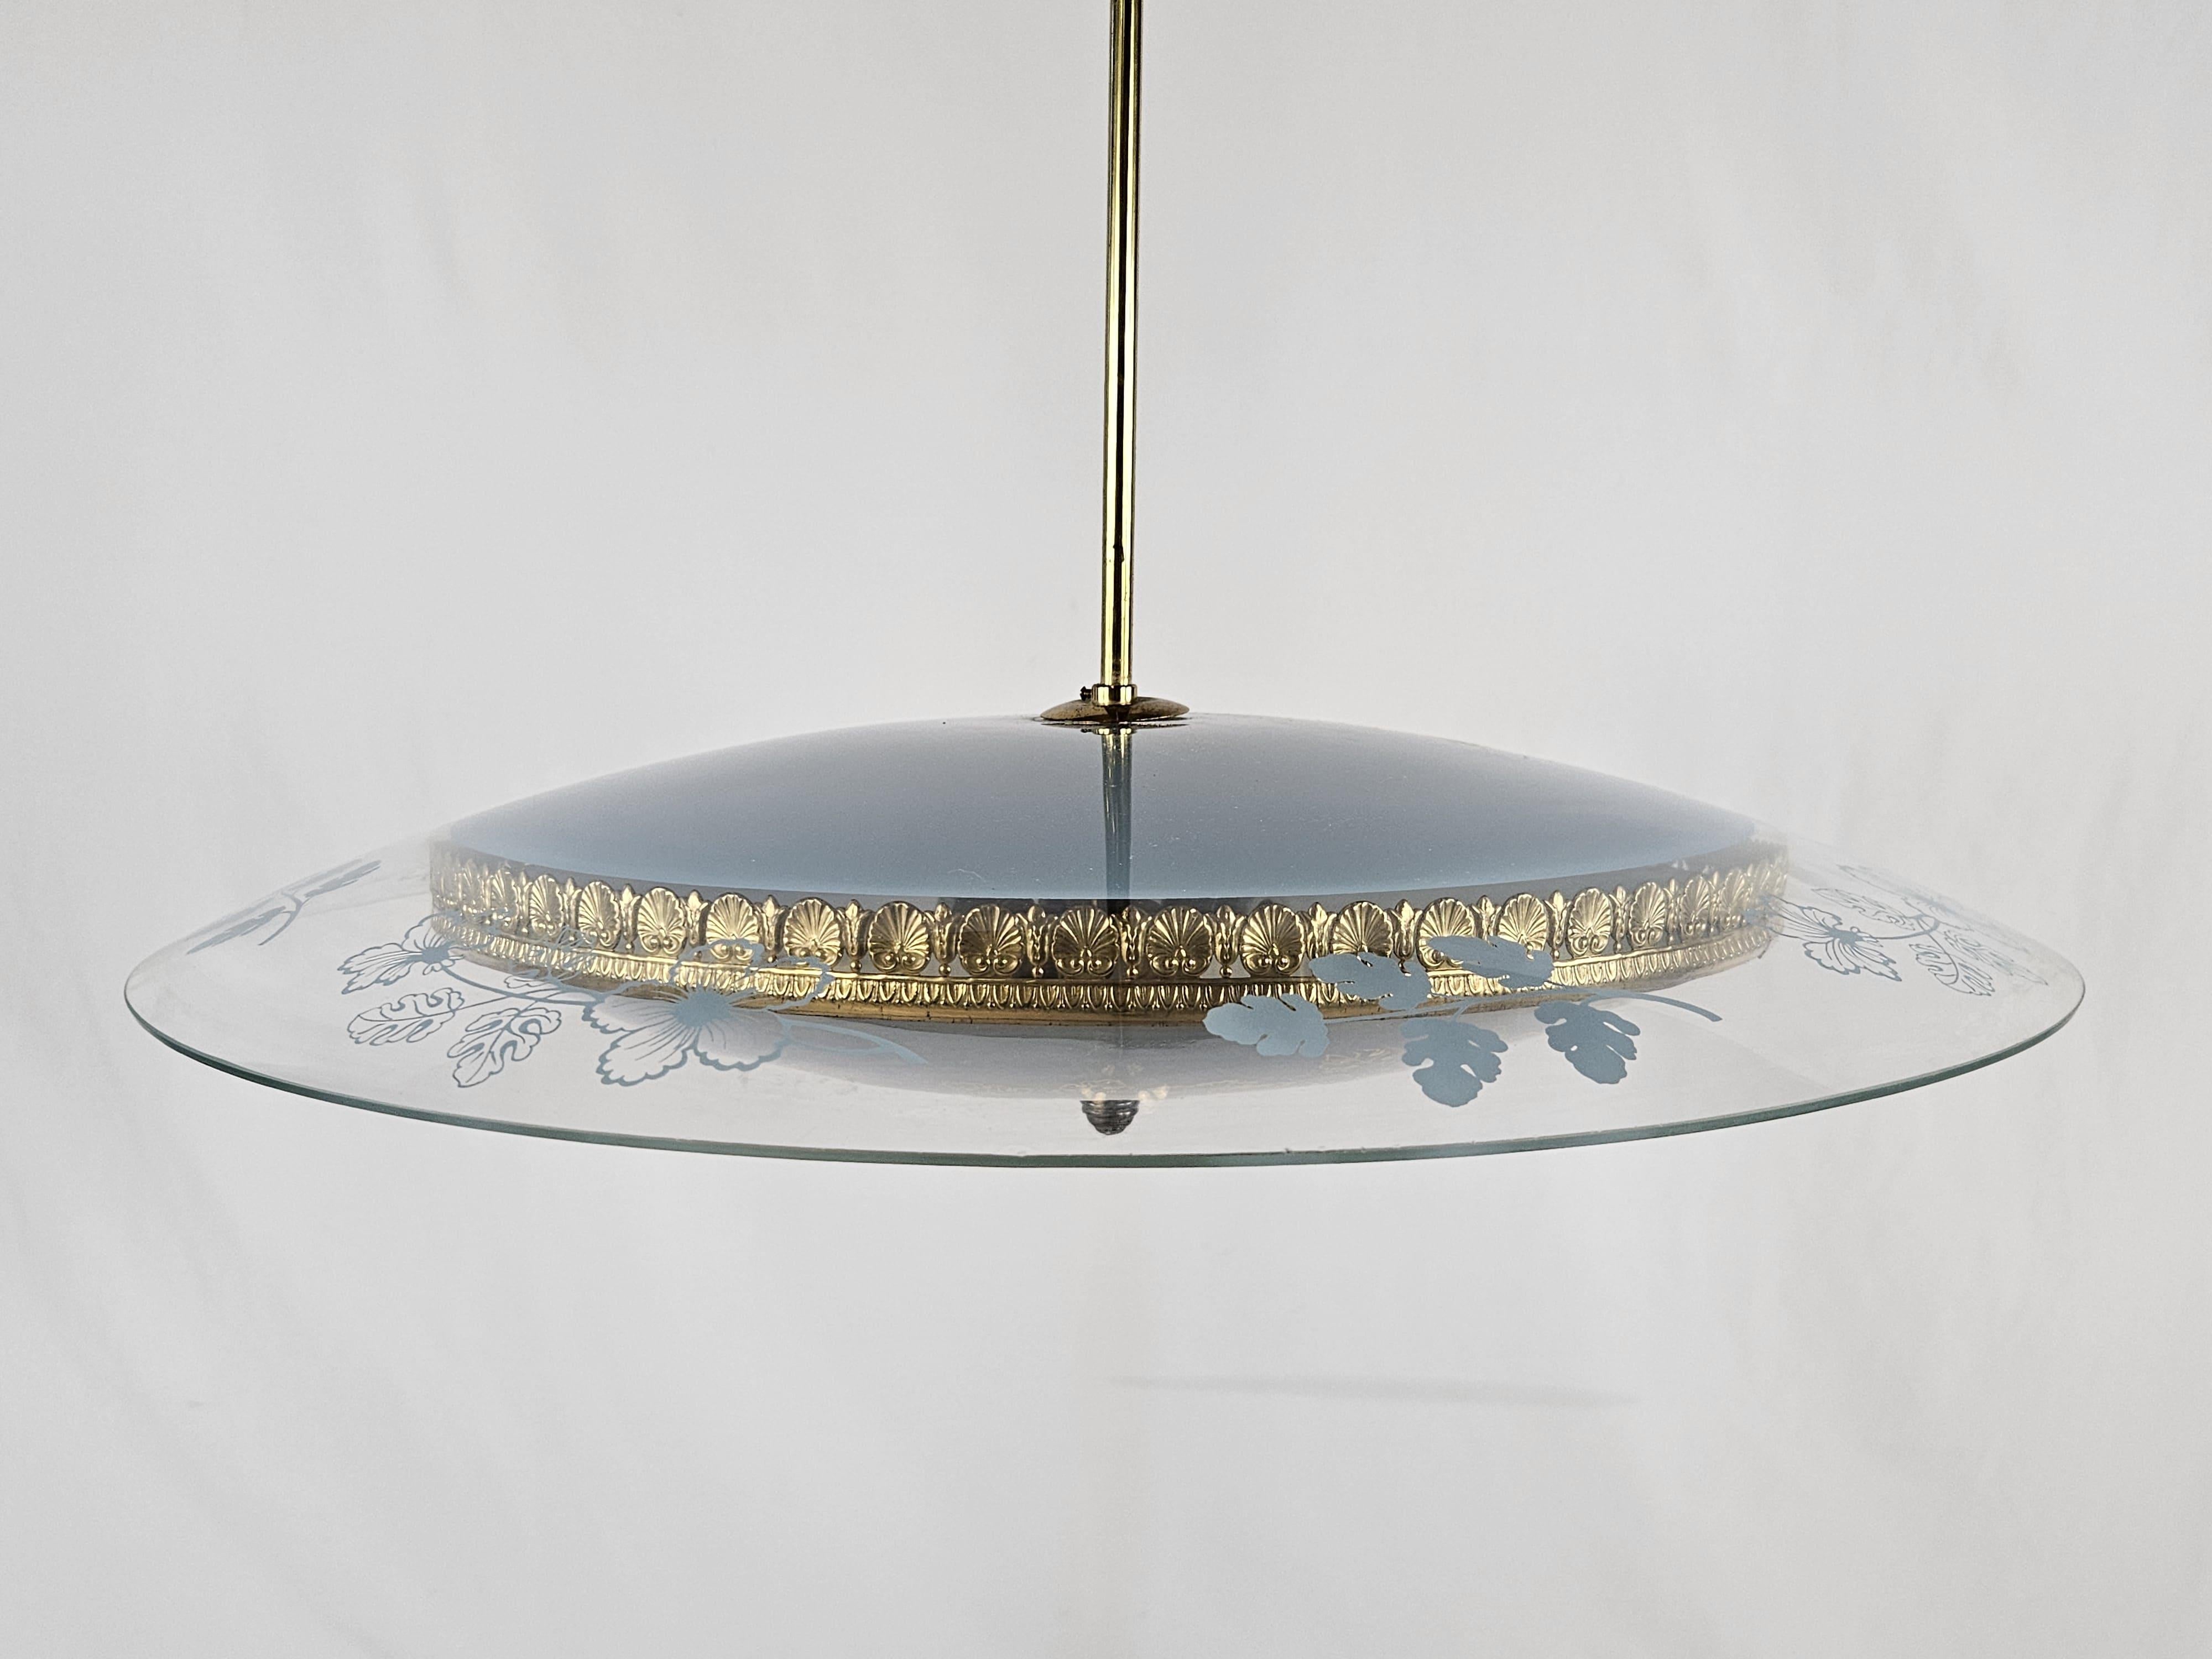 Elegant 1940s glass chandelier with various workmanship and floral-themed decorations.

Main structure and brass edge also machined.

It has no marks or labels, so given the design of the chandelier it can be attributed to Pietro Chiesa for Fontana